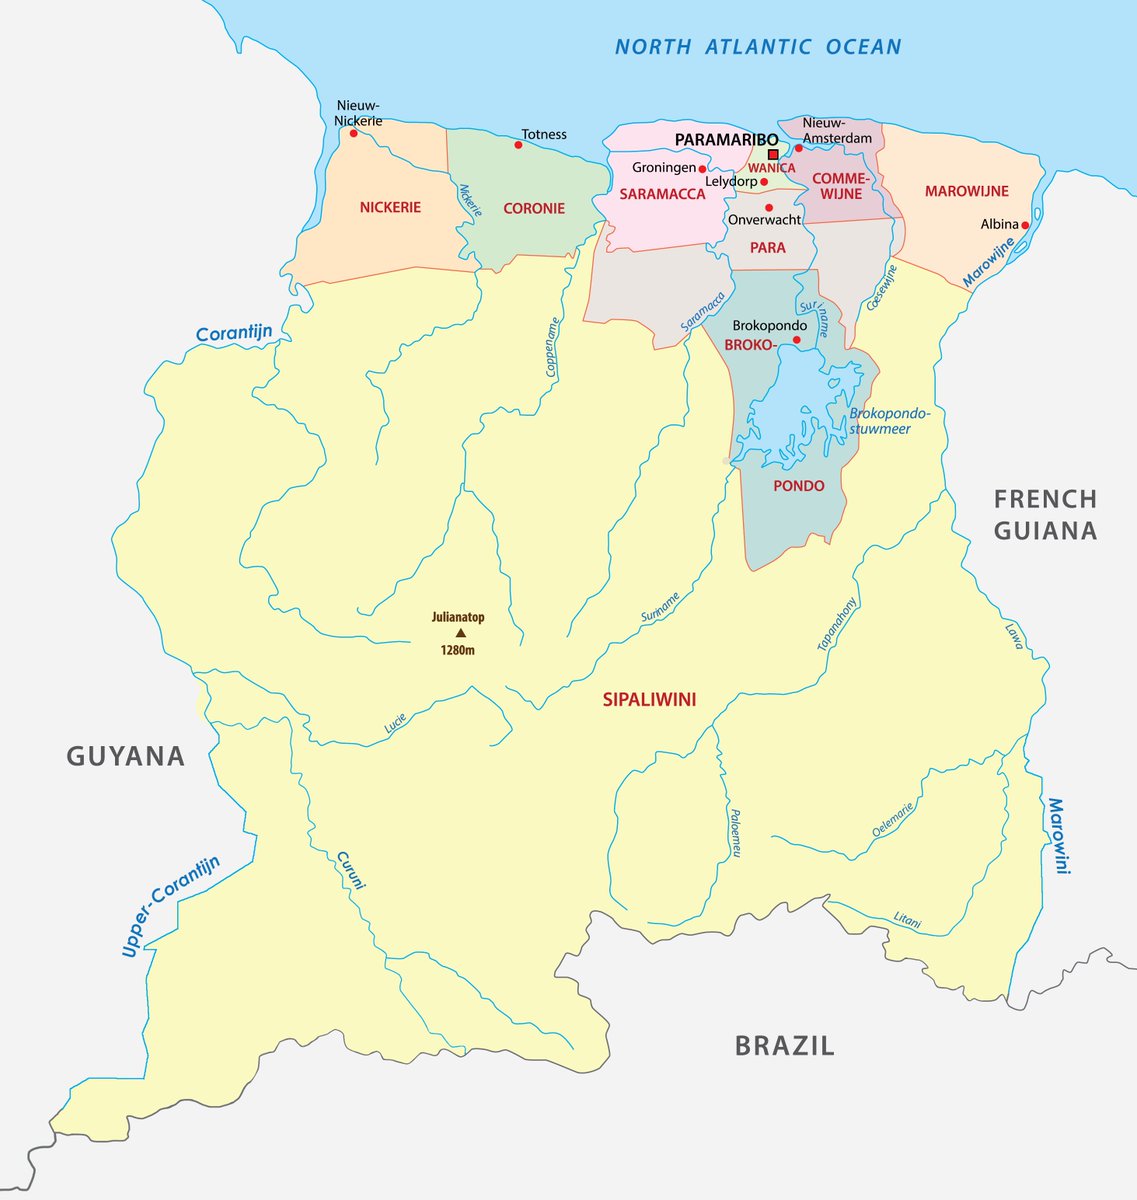 @FoundersMetals We can see the Incorrect borders of Suriname that you placed there. @MOFASur  i hope you see these false maps of Suriname being shown here on this platform. This map below shows us the Real borders of #Suriname